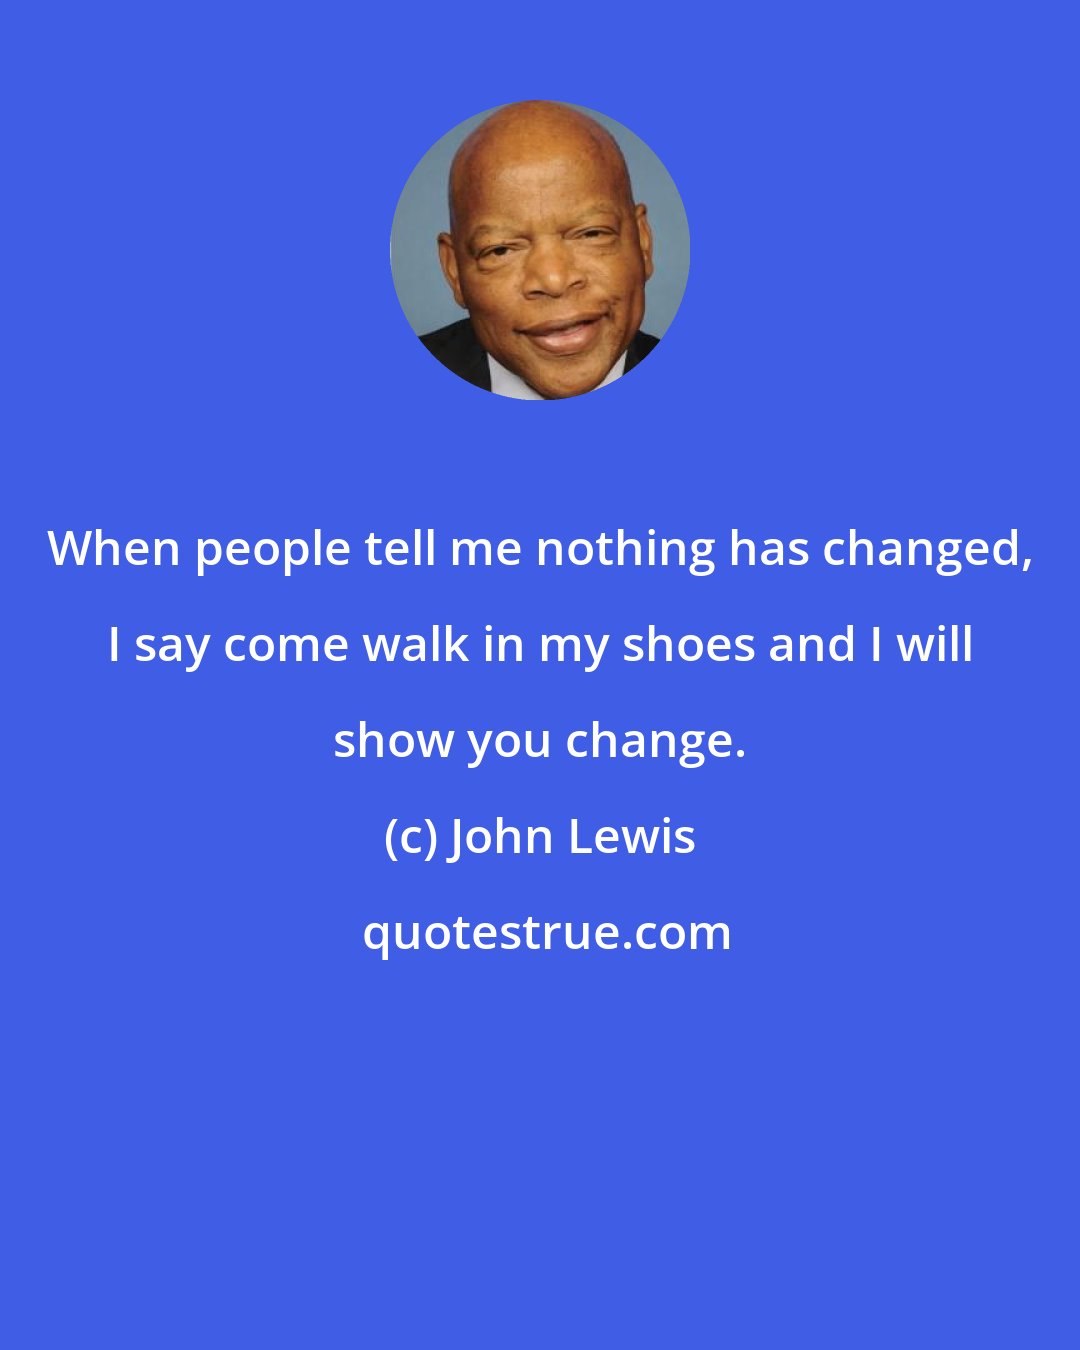 John Lewis: When people tell me nothing has changed, I say come walk in my shoes and I will show you change.